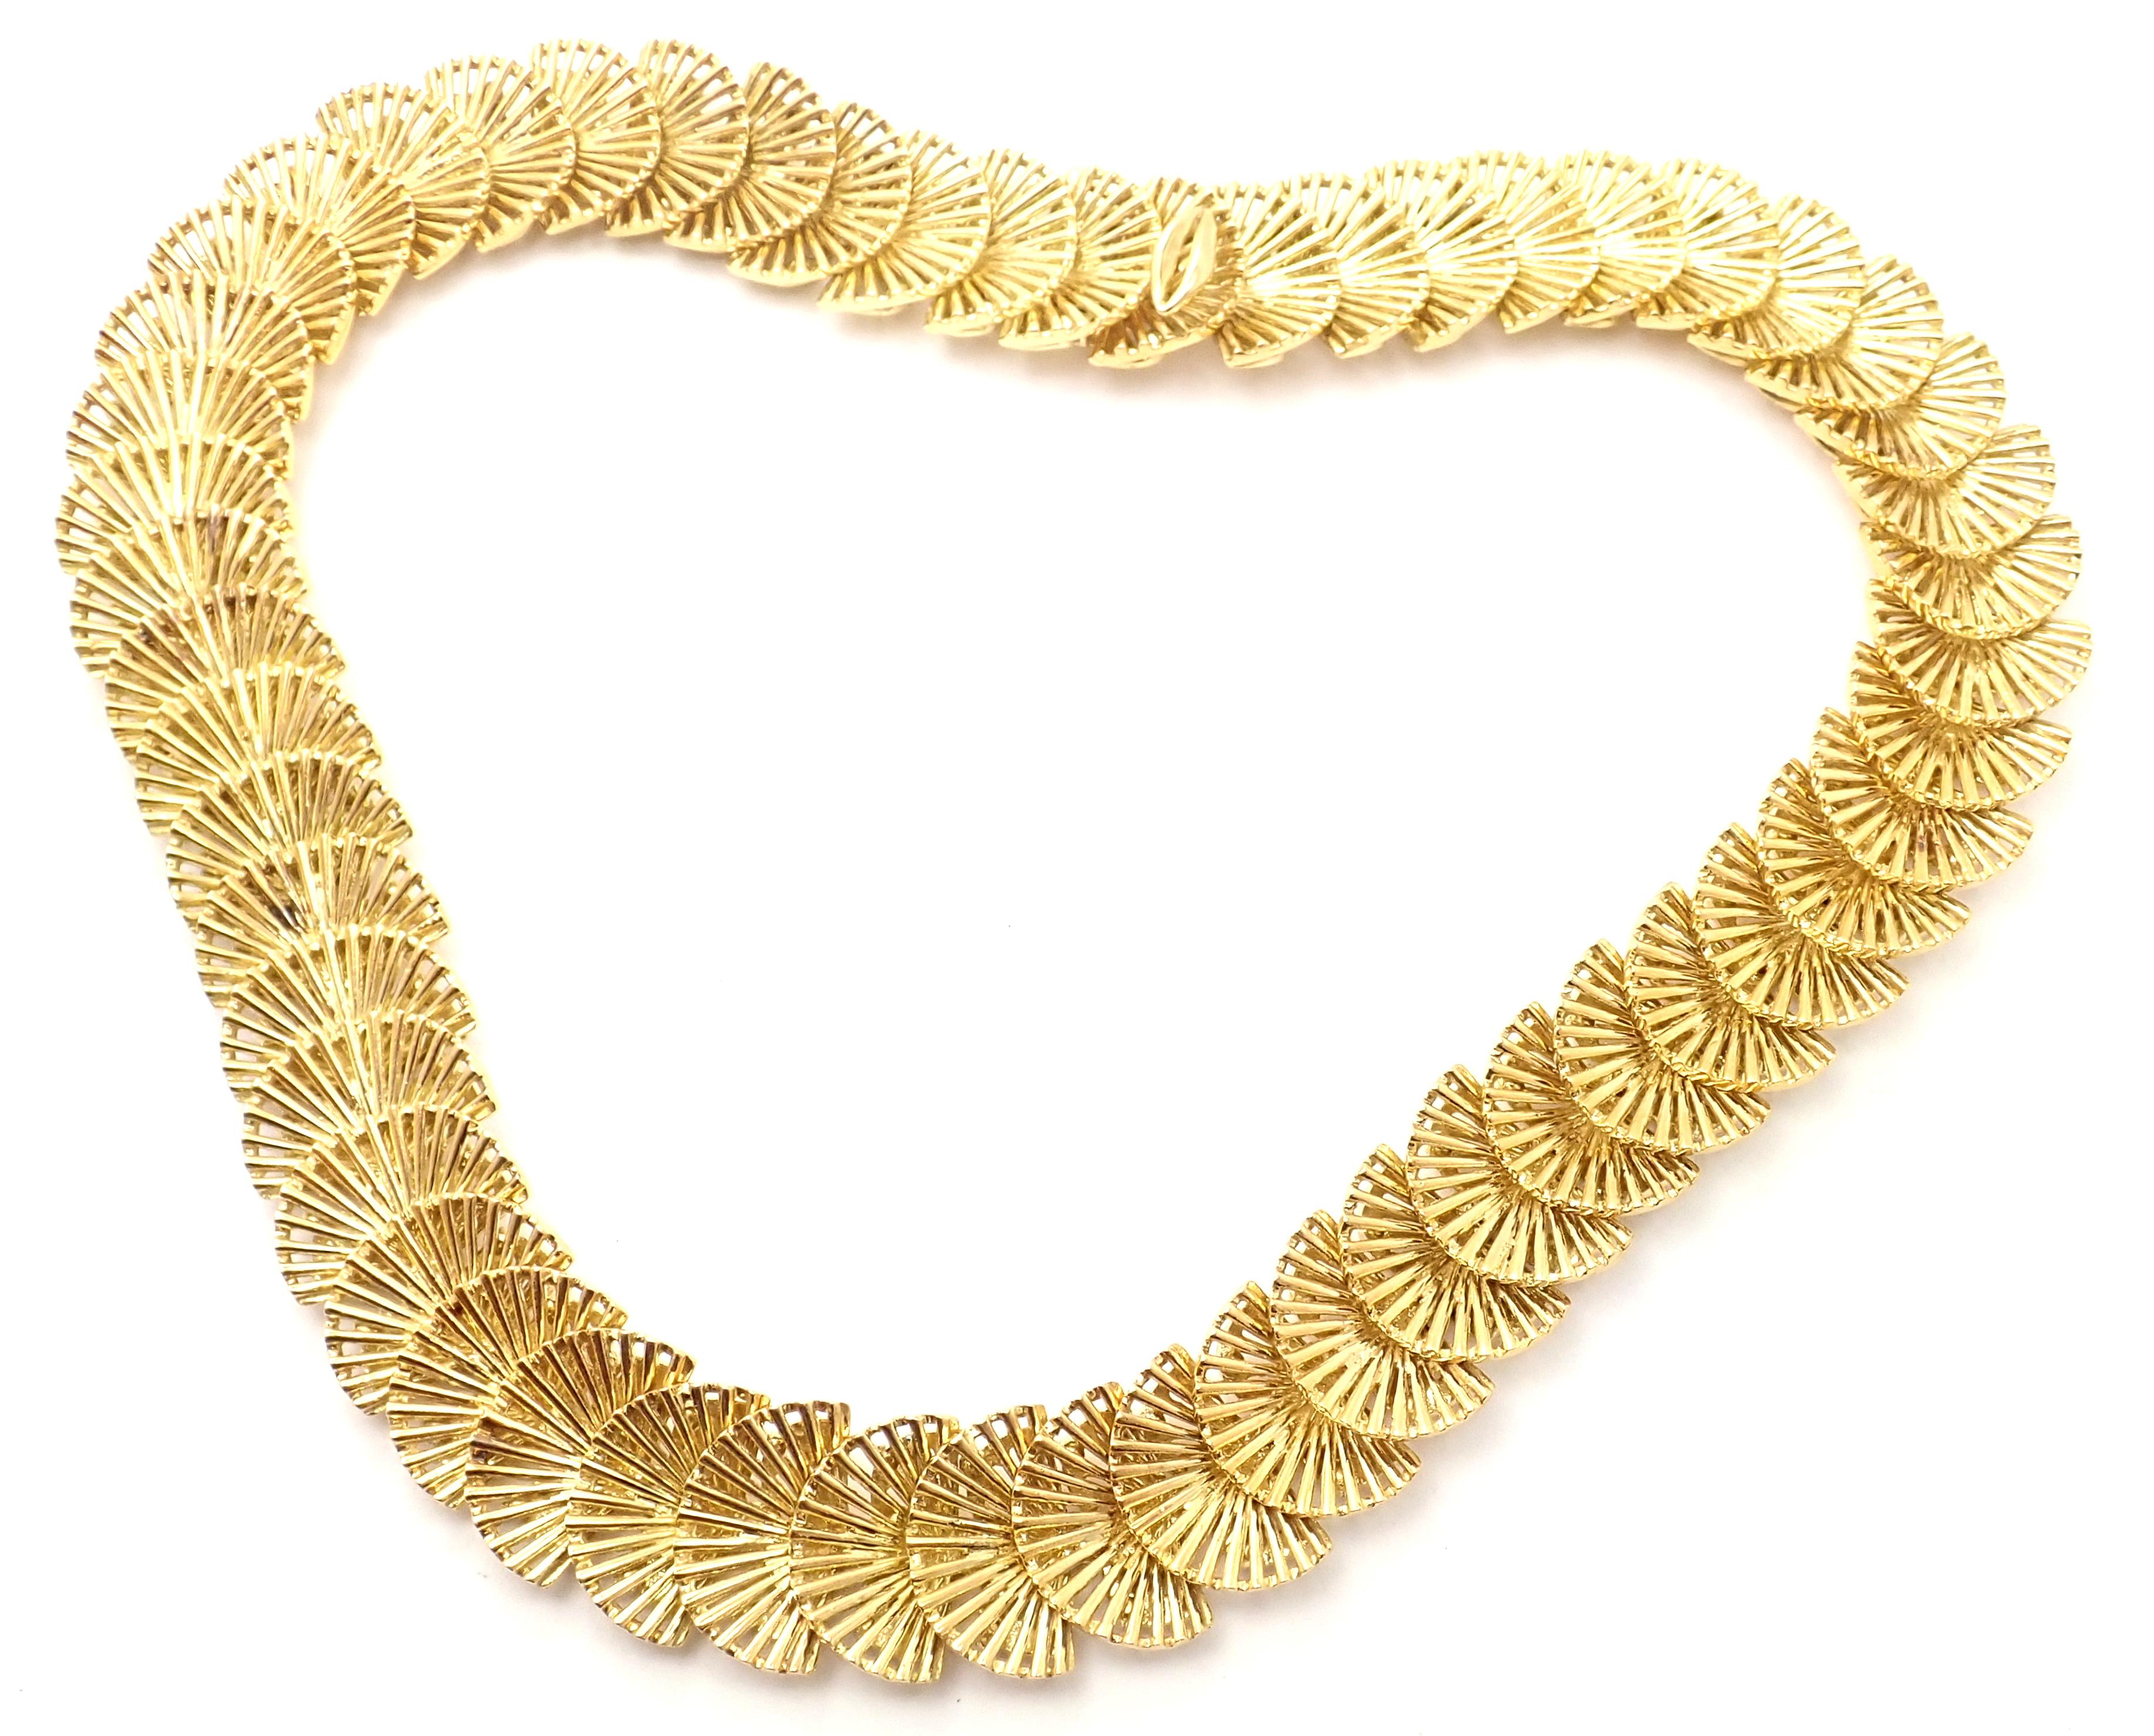 18k Yellow Gold Vintage Fan Shell Link Necklace by Tiffany Co.
Details: 
Length: 15.5